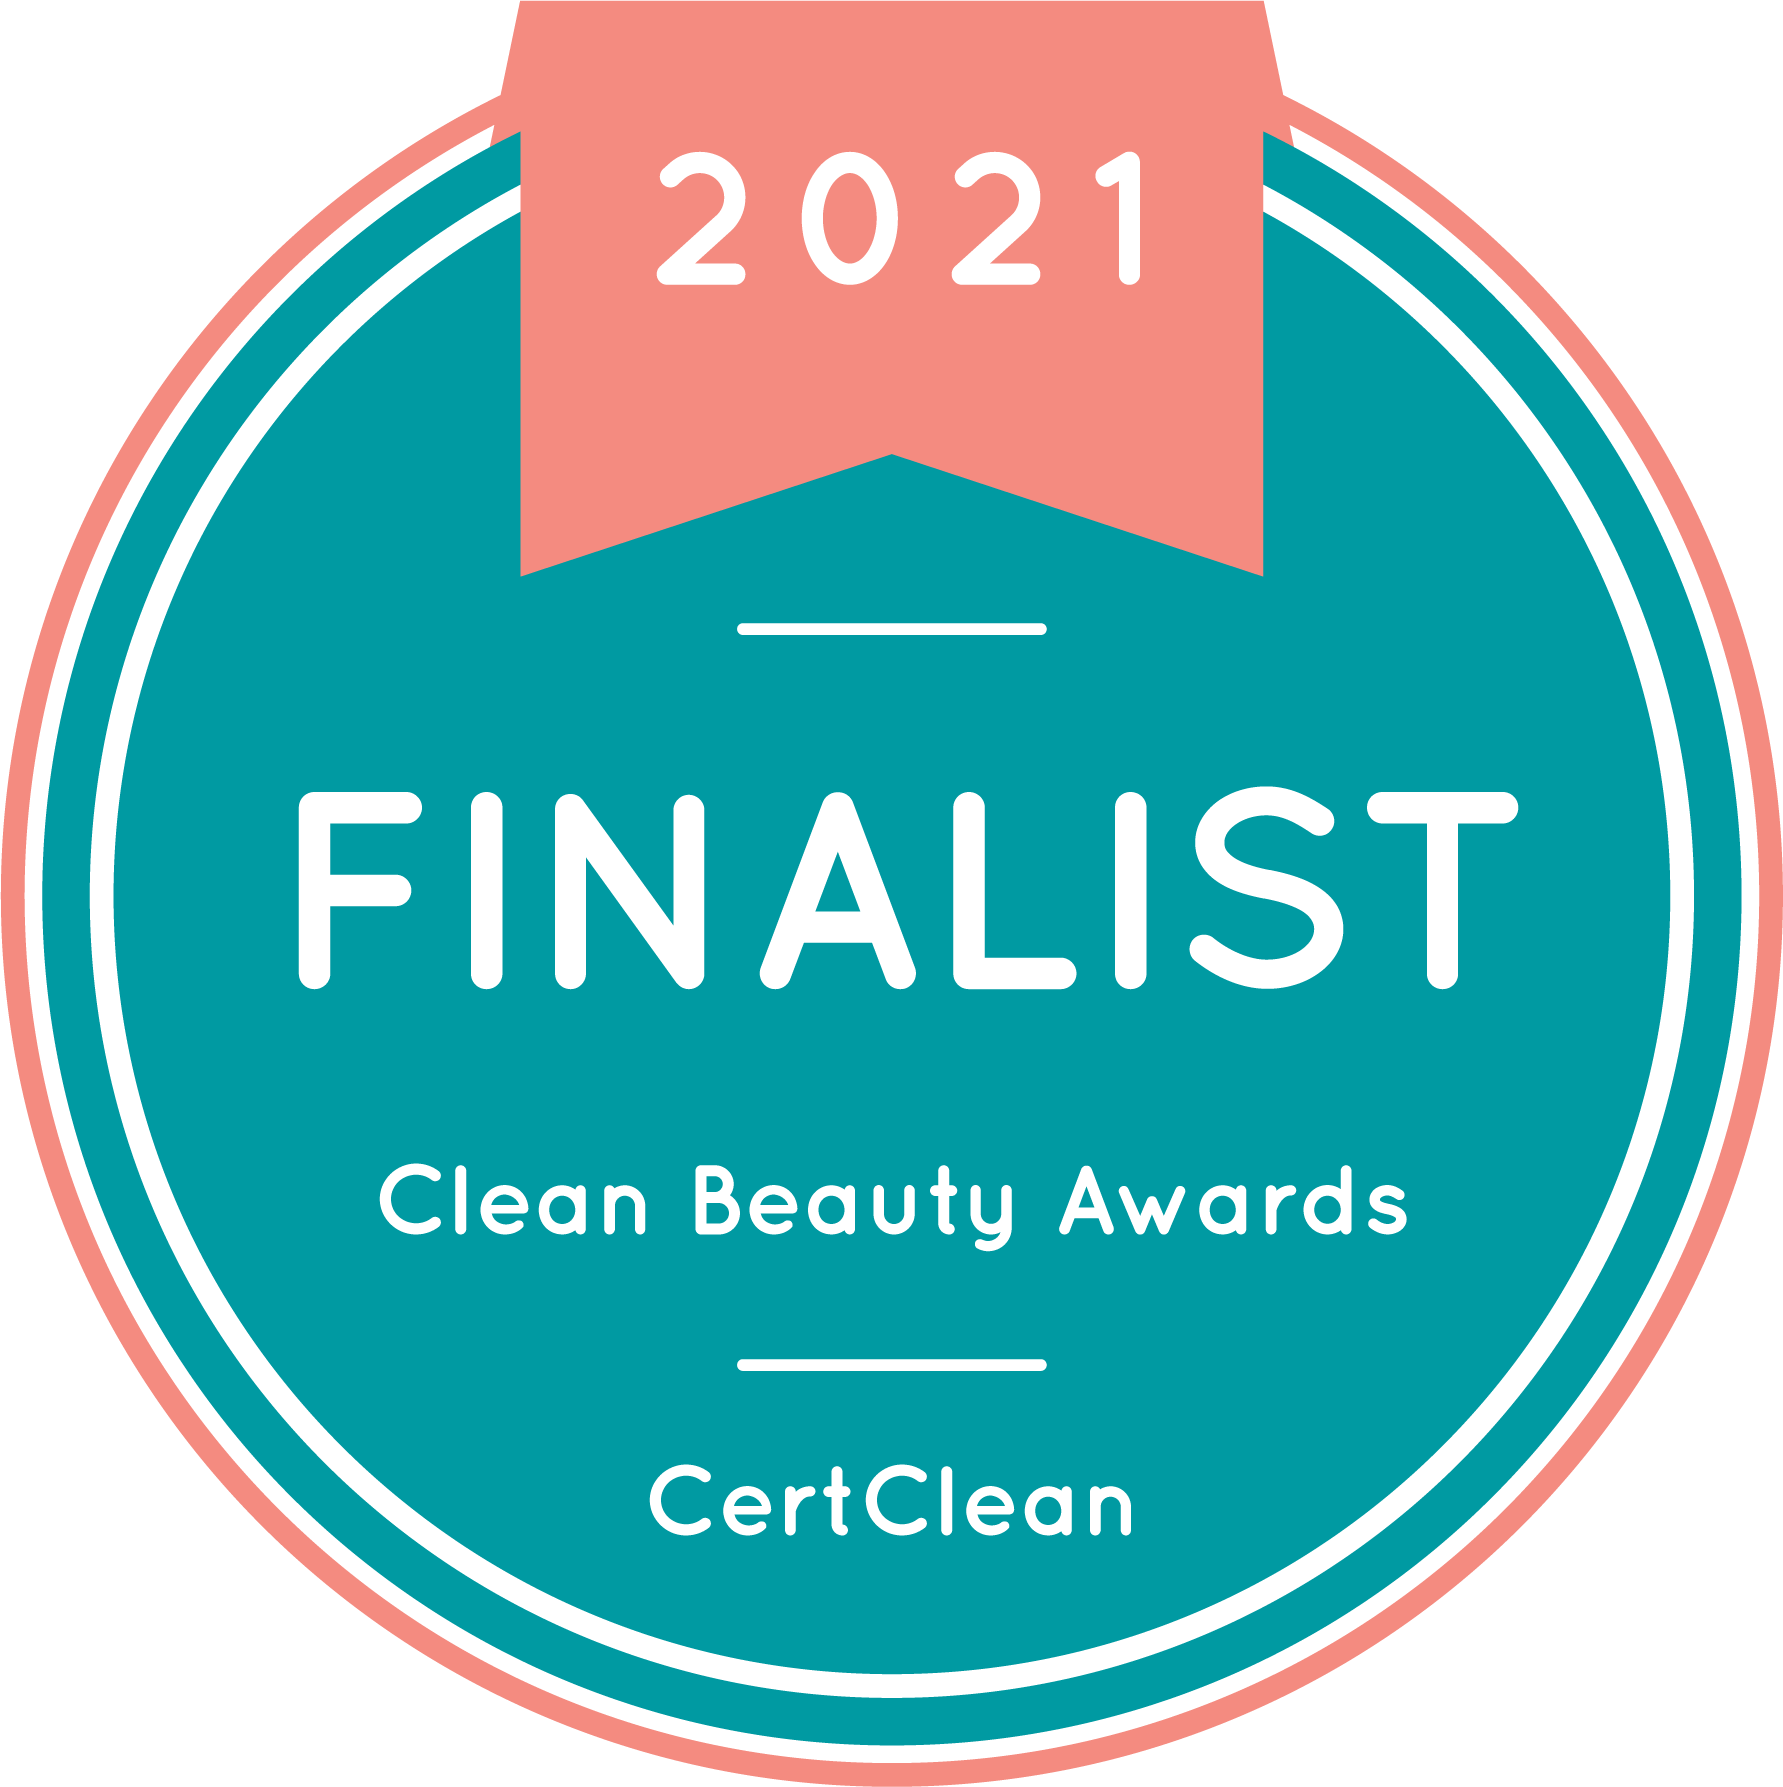 The 2021 Clean Beauty Awards Finalist